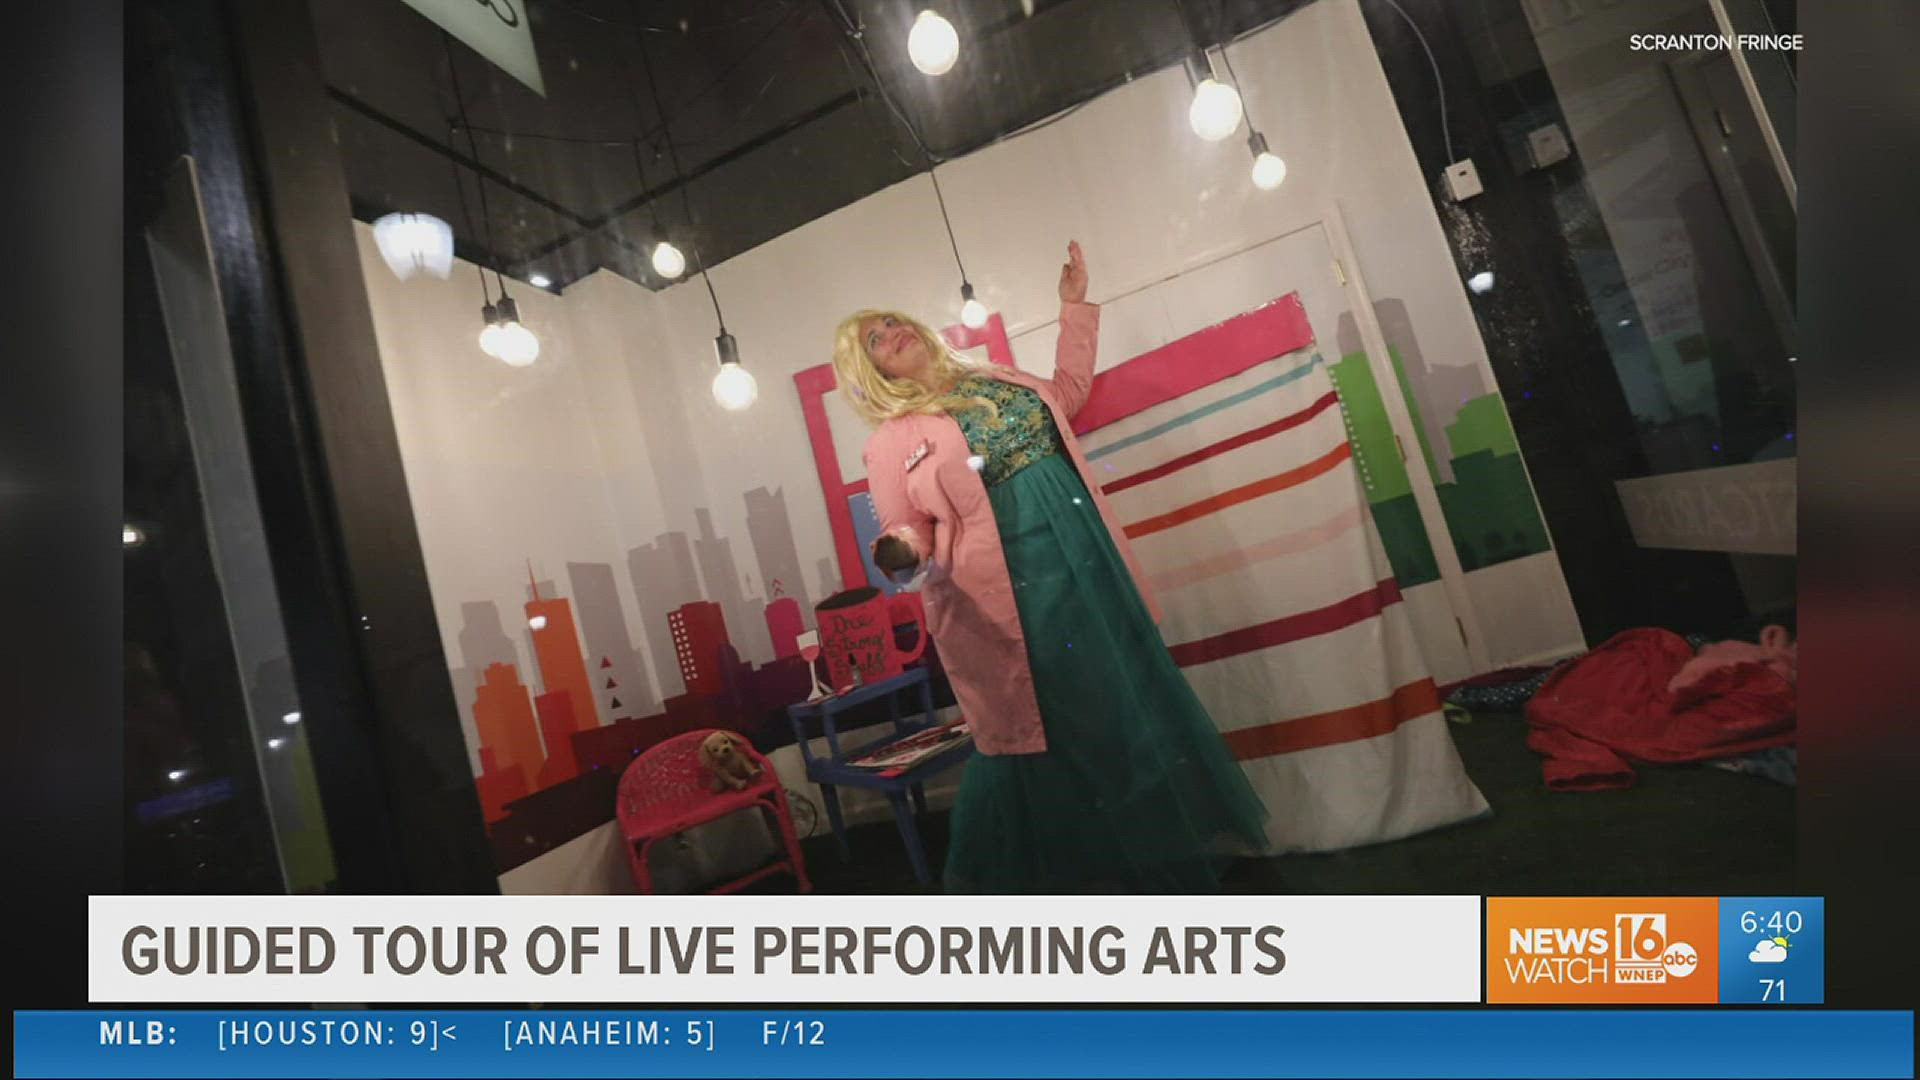 Scranton Fringe Festival brings back "Fringe Under Glass" this week for an innovative walking tour of live performances, circus arts, and more.